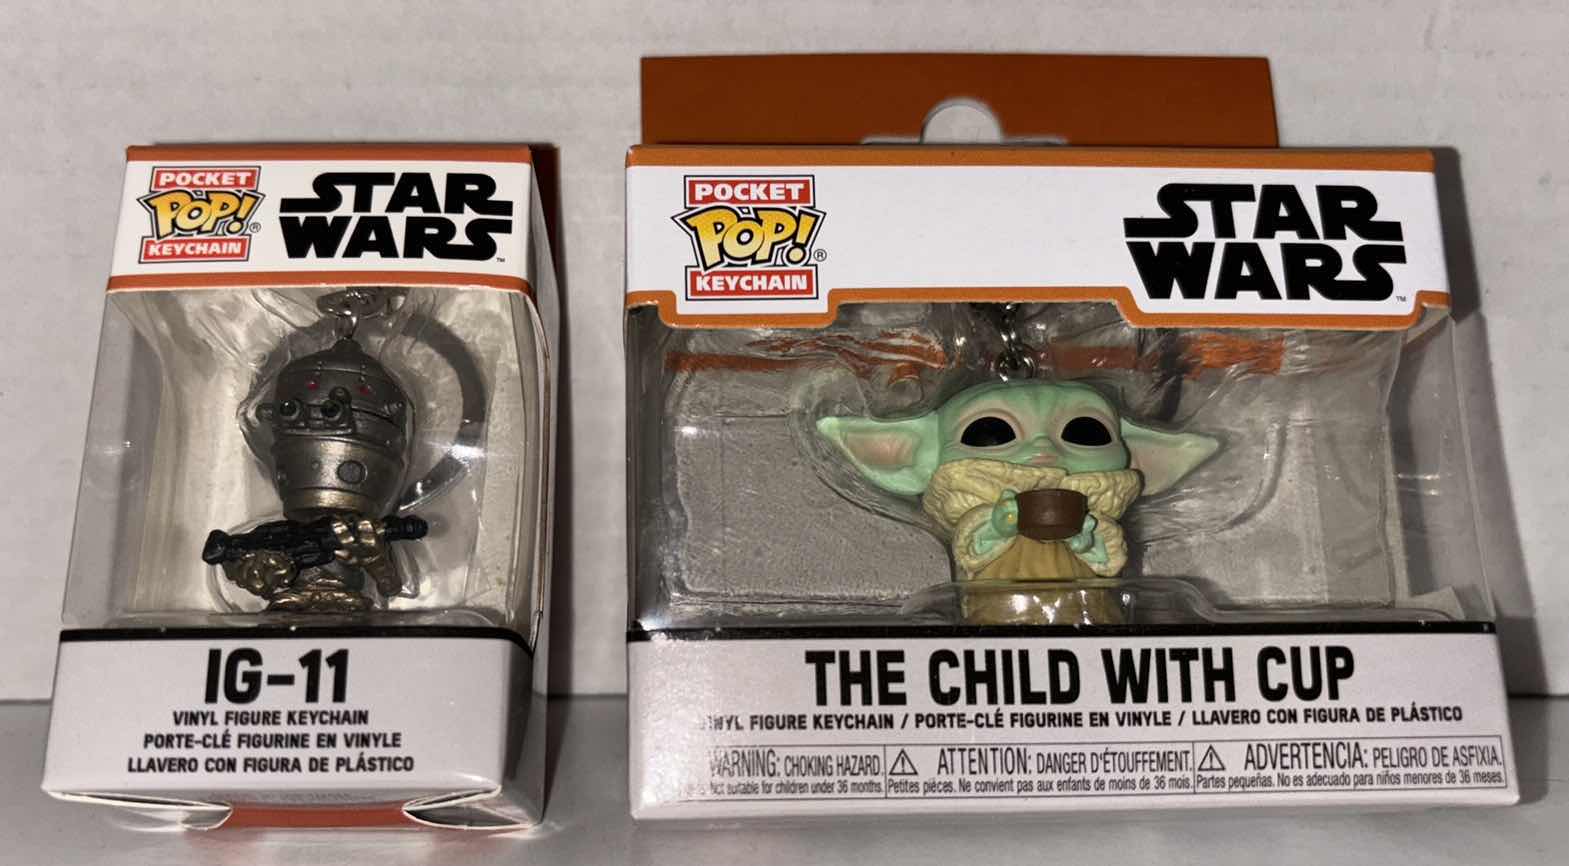 Photo 1 of NEW FUNKO POP! POCKET KEYCHAIN 2-PACK, STAR WARS “IG-11” & “THE CHILD WITH CUP” 